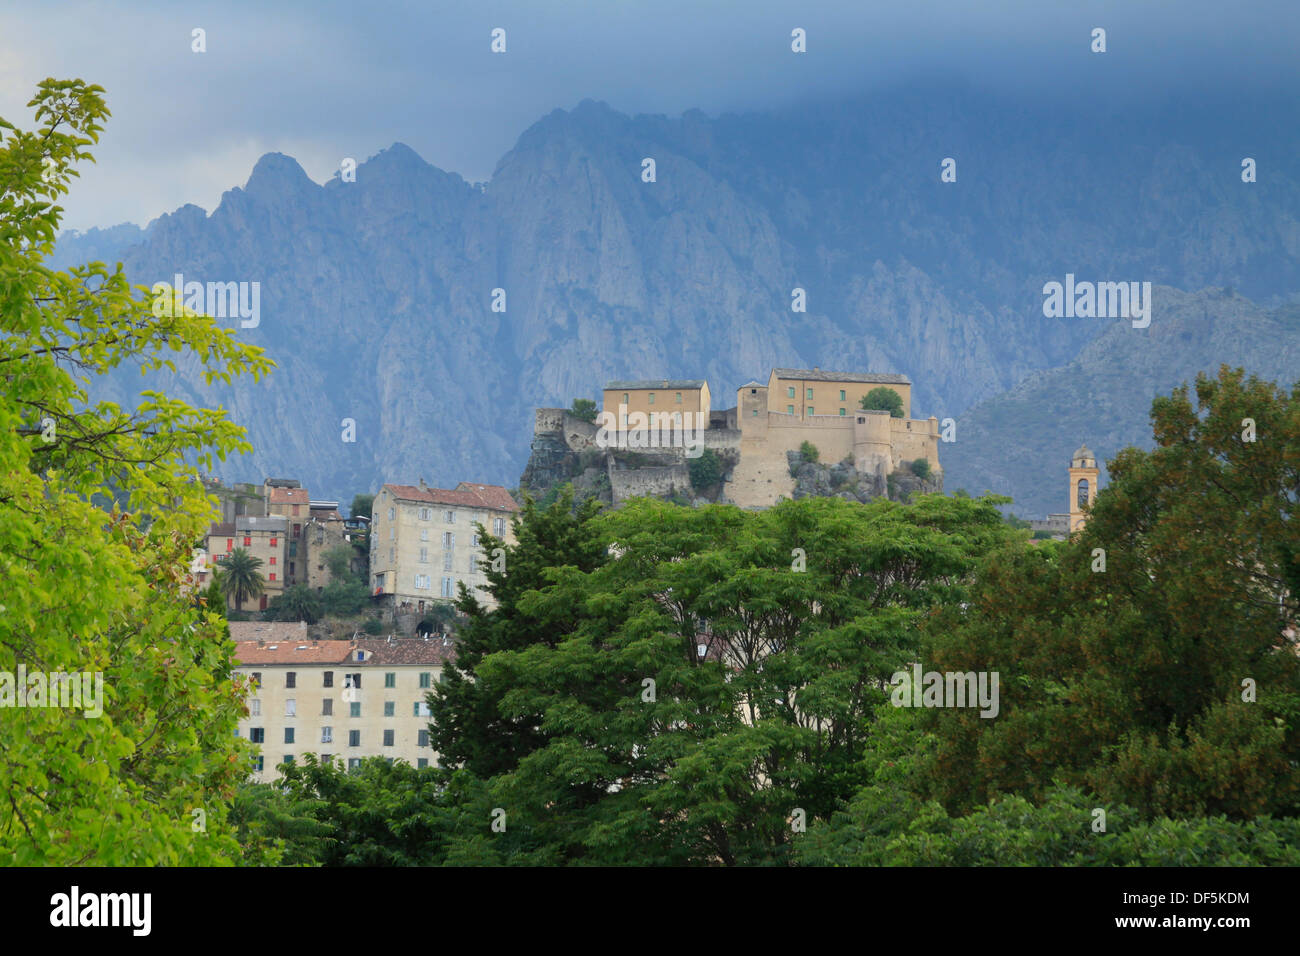 Panoramic view of the citadel and the city of Corte with mountains in the background in North Corsica Stock Photo